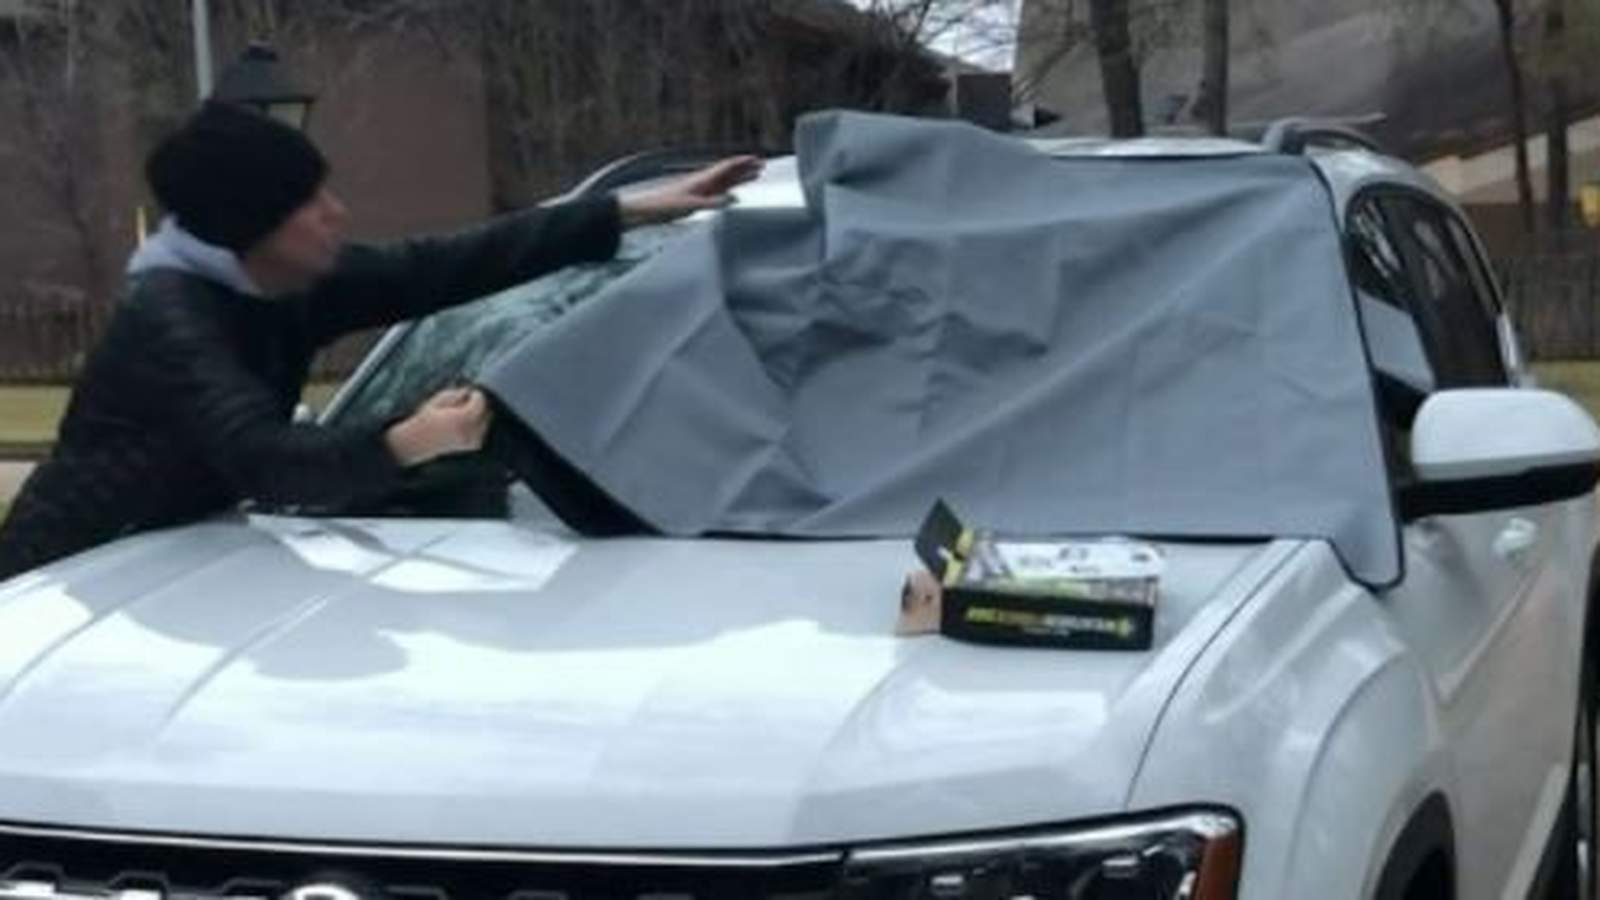 Test it Tuesday: Will this $20 car cover protect your vehicle from ice and heat?